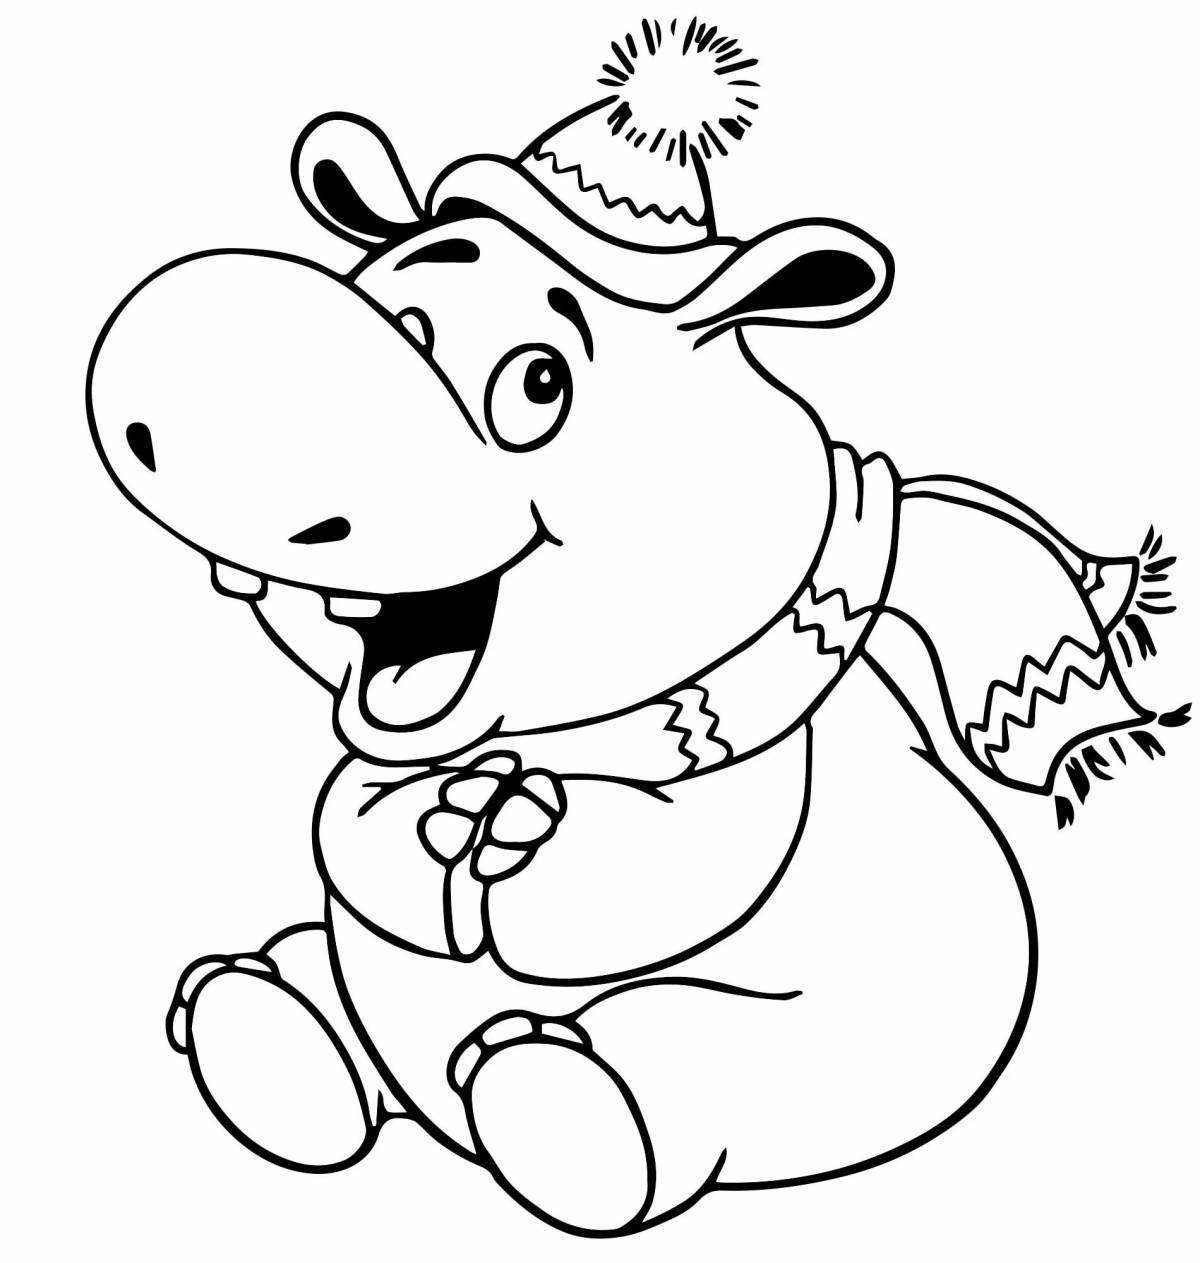 Cute hippo coloring for 3-4 year olds